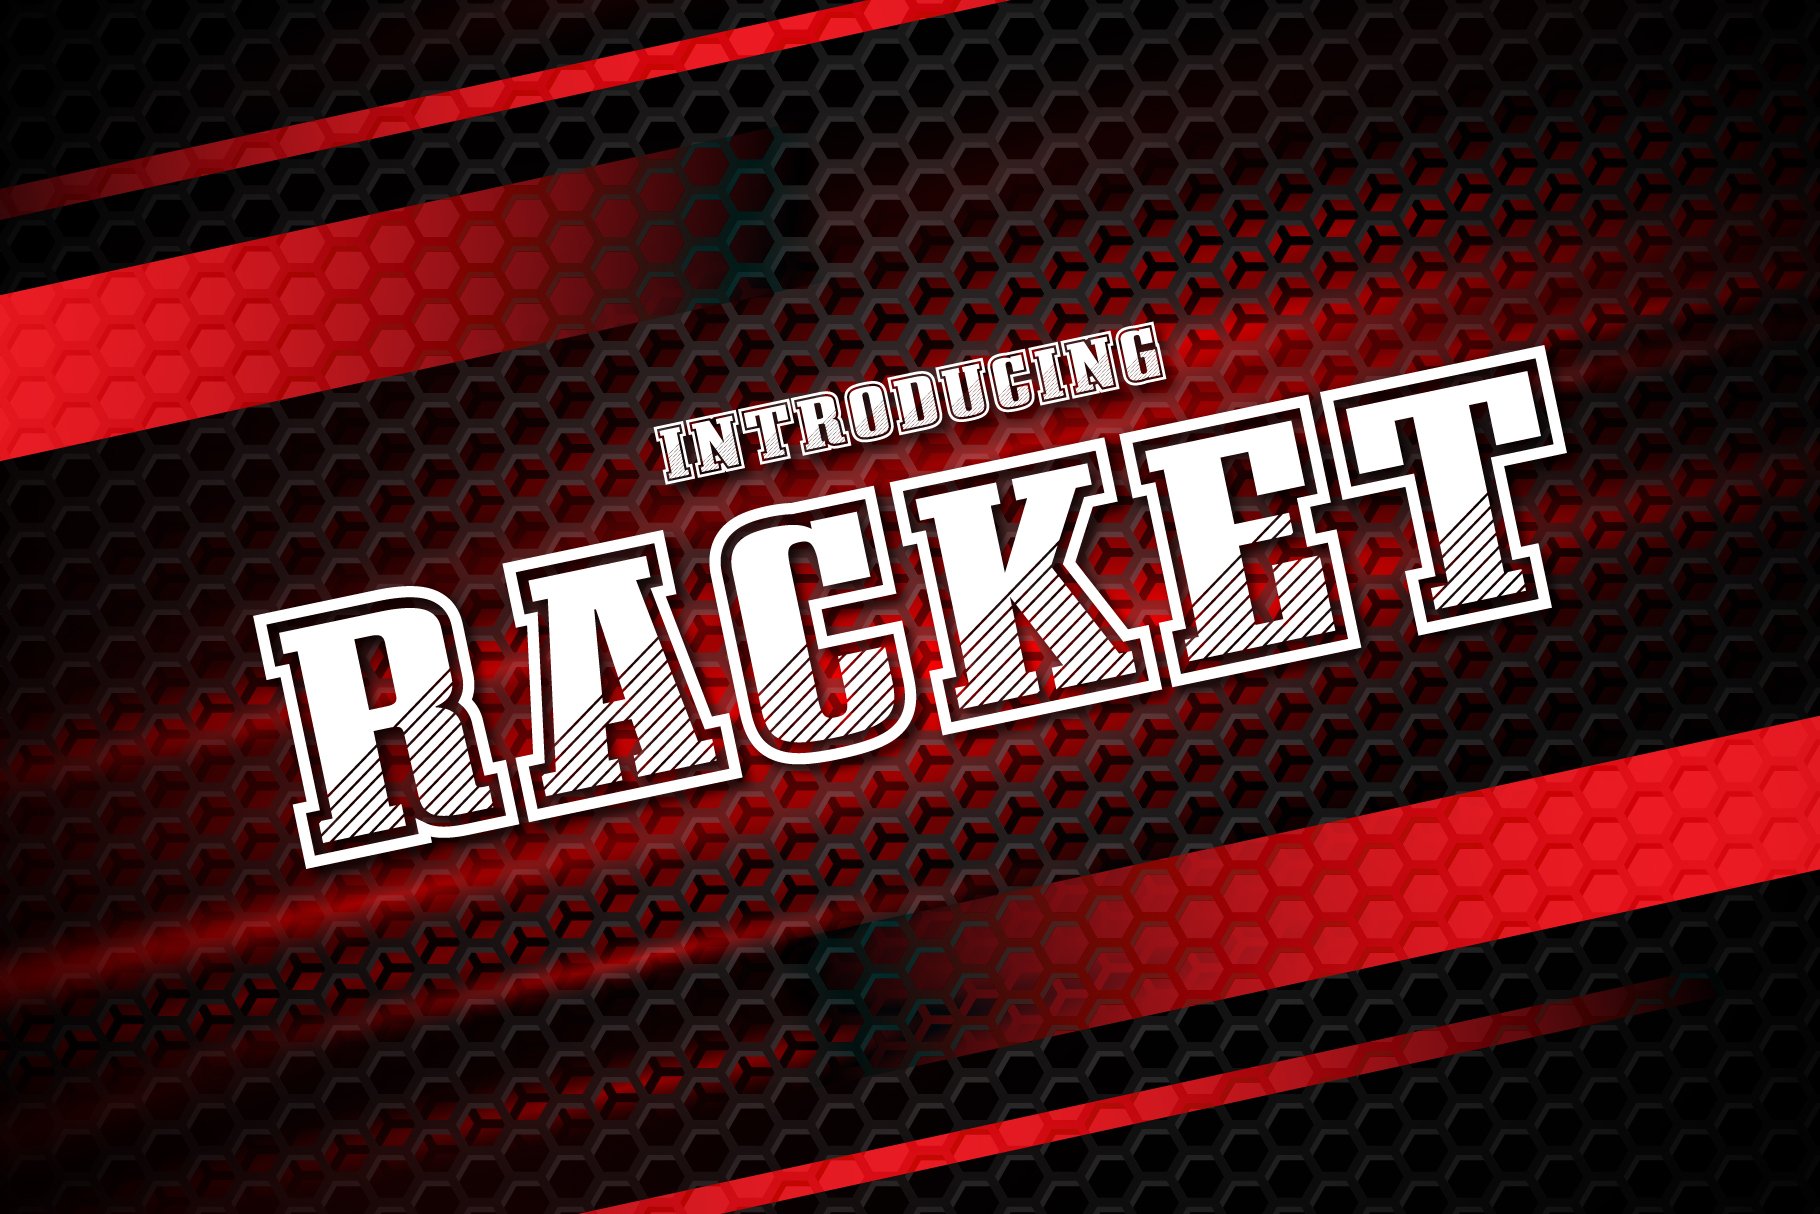 Racket Fonts cover image.